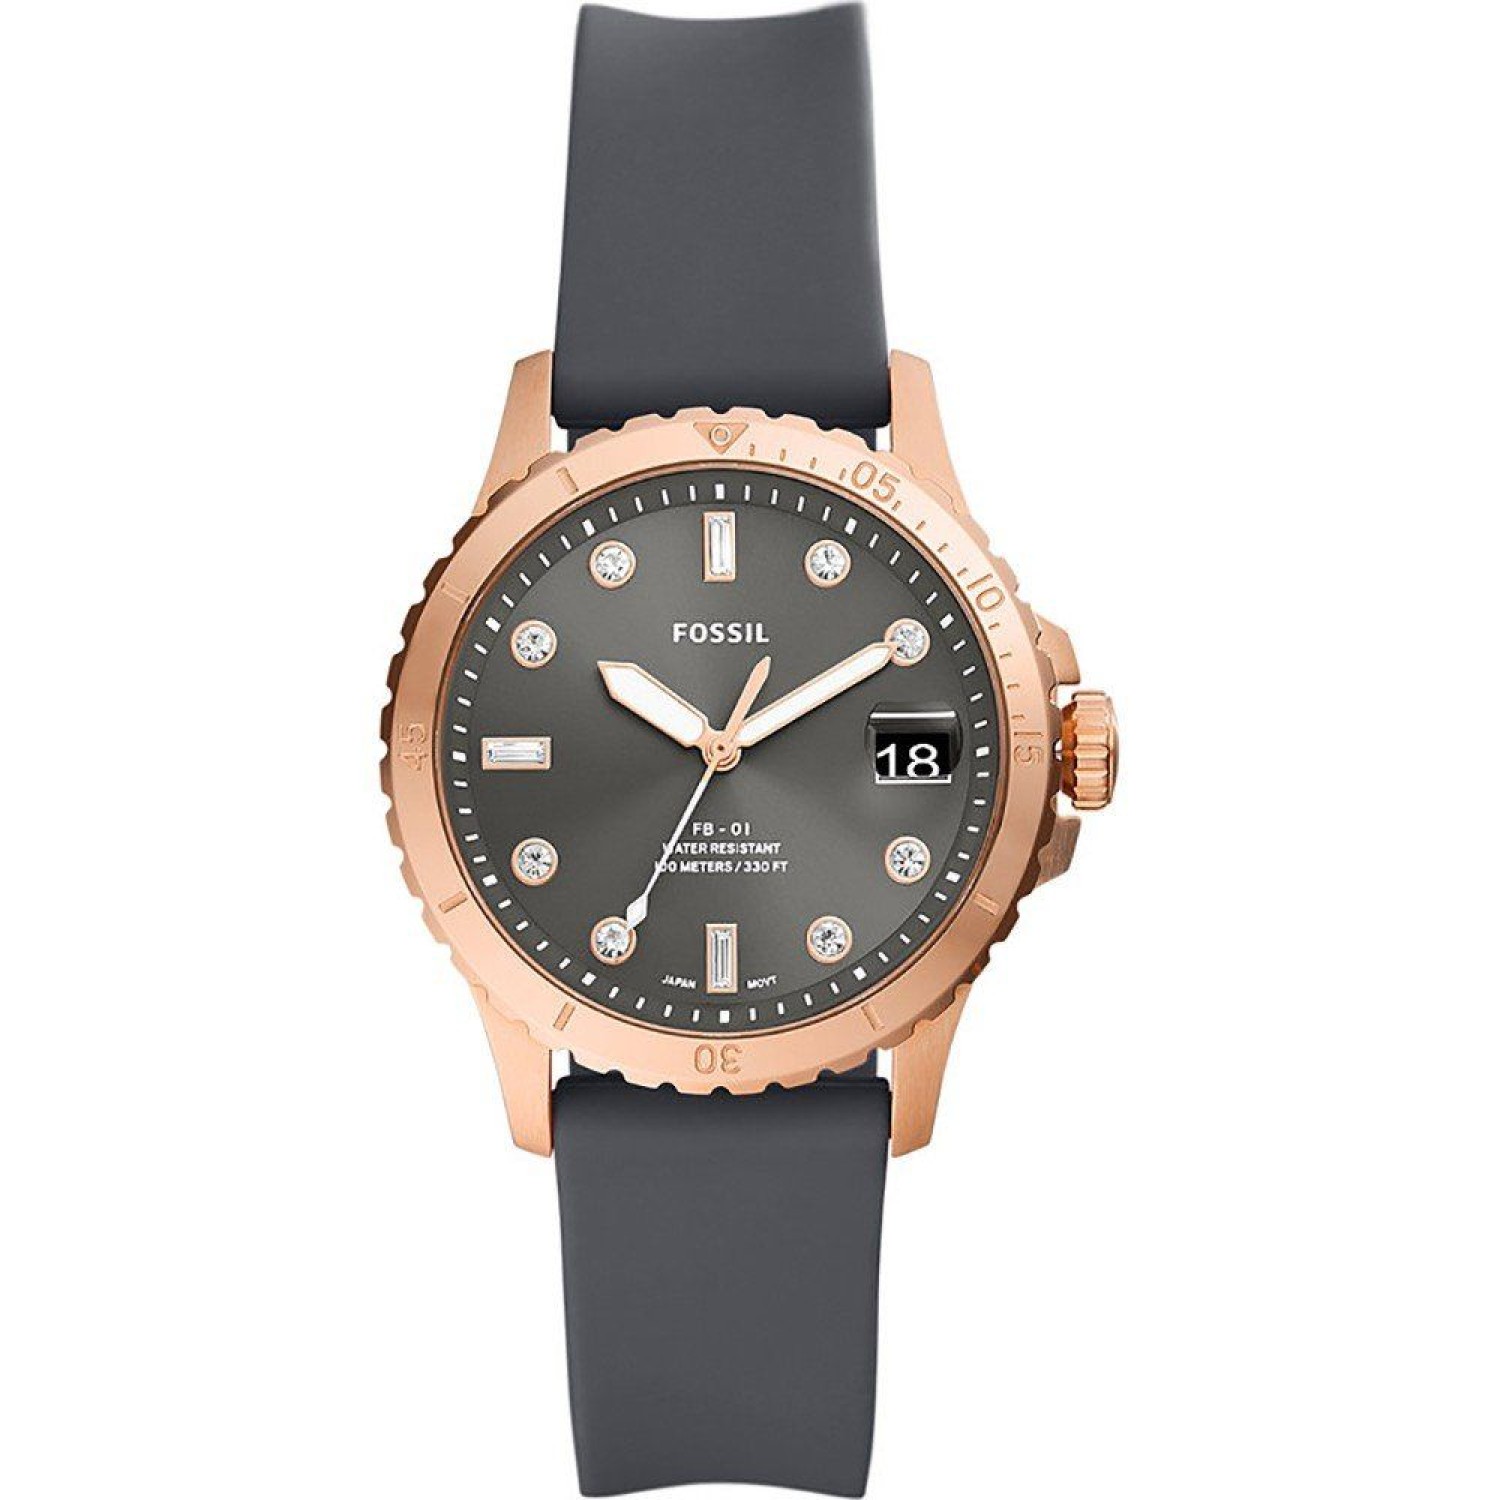 ES5293 Fossil FB-01 Rose-Gold Tone Three-Hand Date Gray Silicone Watch 